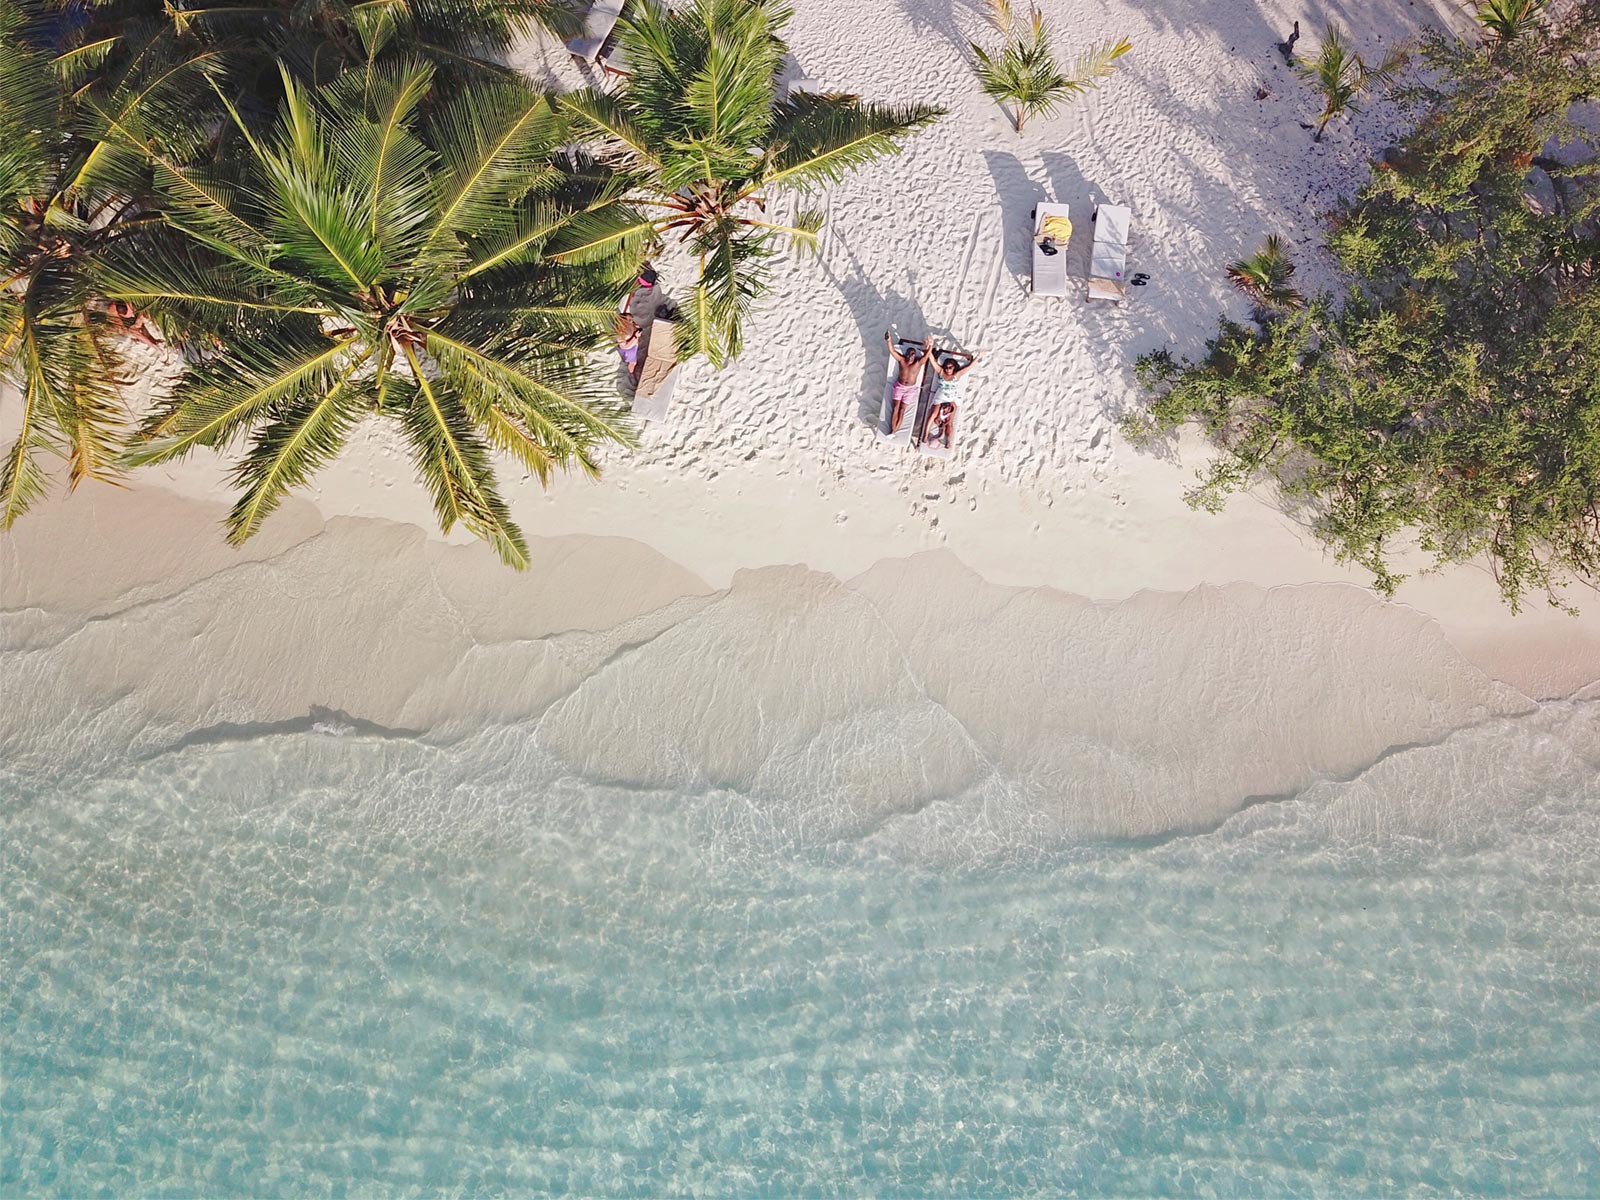 Family on Bandos Maldives Island - Birds Eye Drone View (Best Beaches in the World)